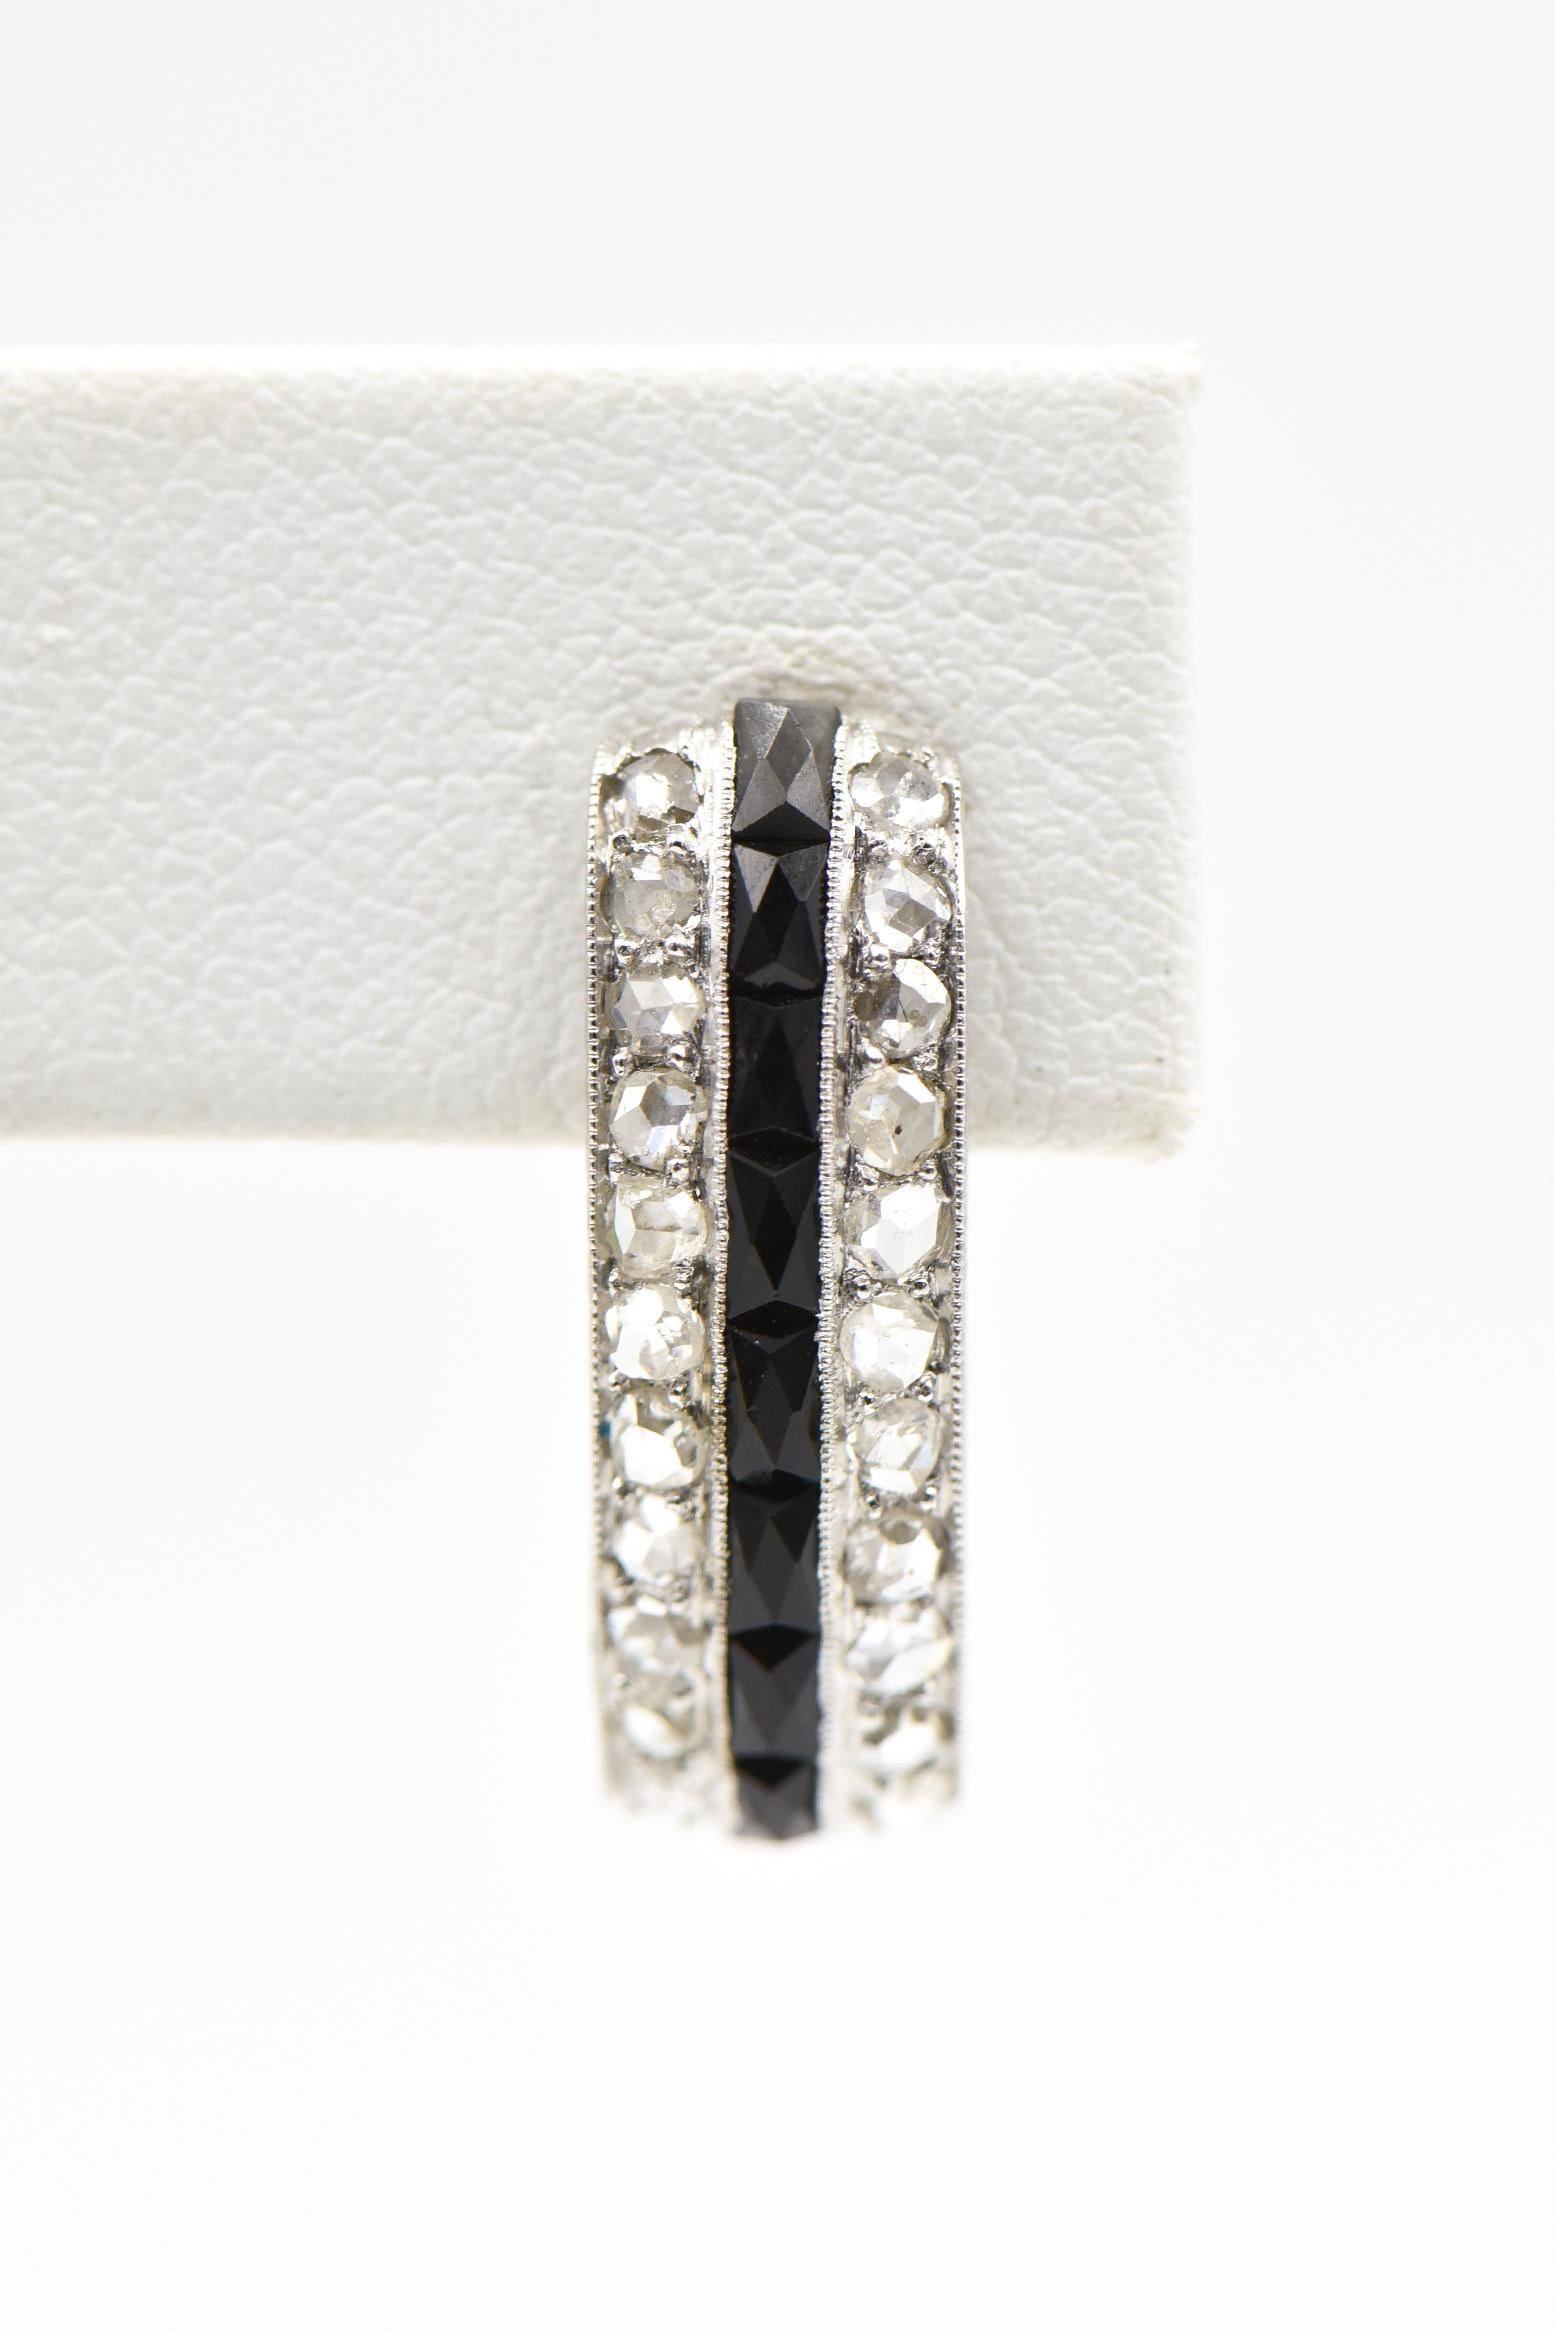 Beautifully made art deco hoop platinum earrings featuring a line of channel set onyx between 2 rows of rose cut diamonds.  The sides are nicely etched with wheat design.  The backs have been replaced with 14k white gold monster backs.  The earrings